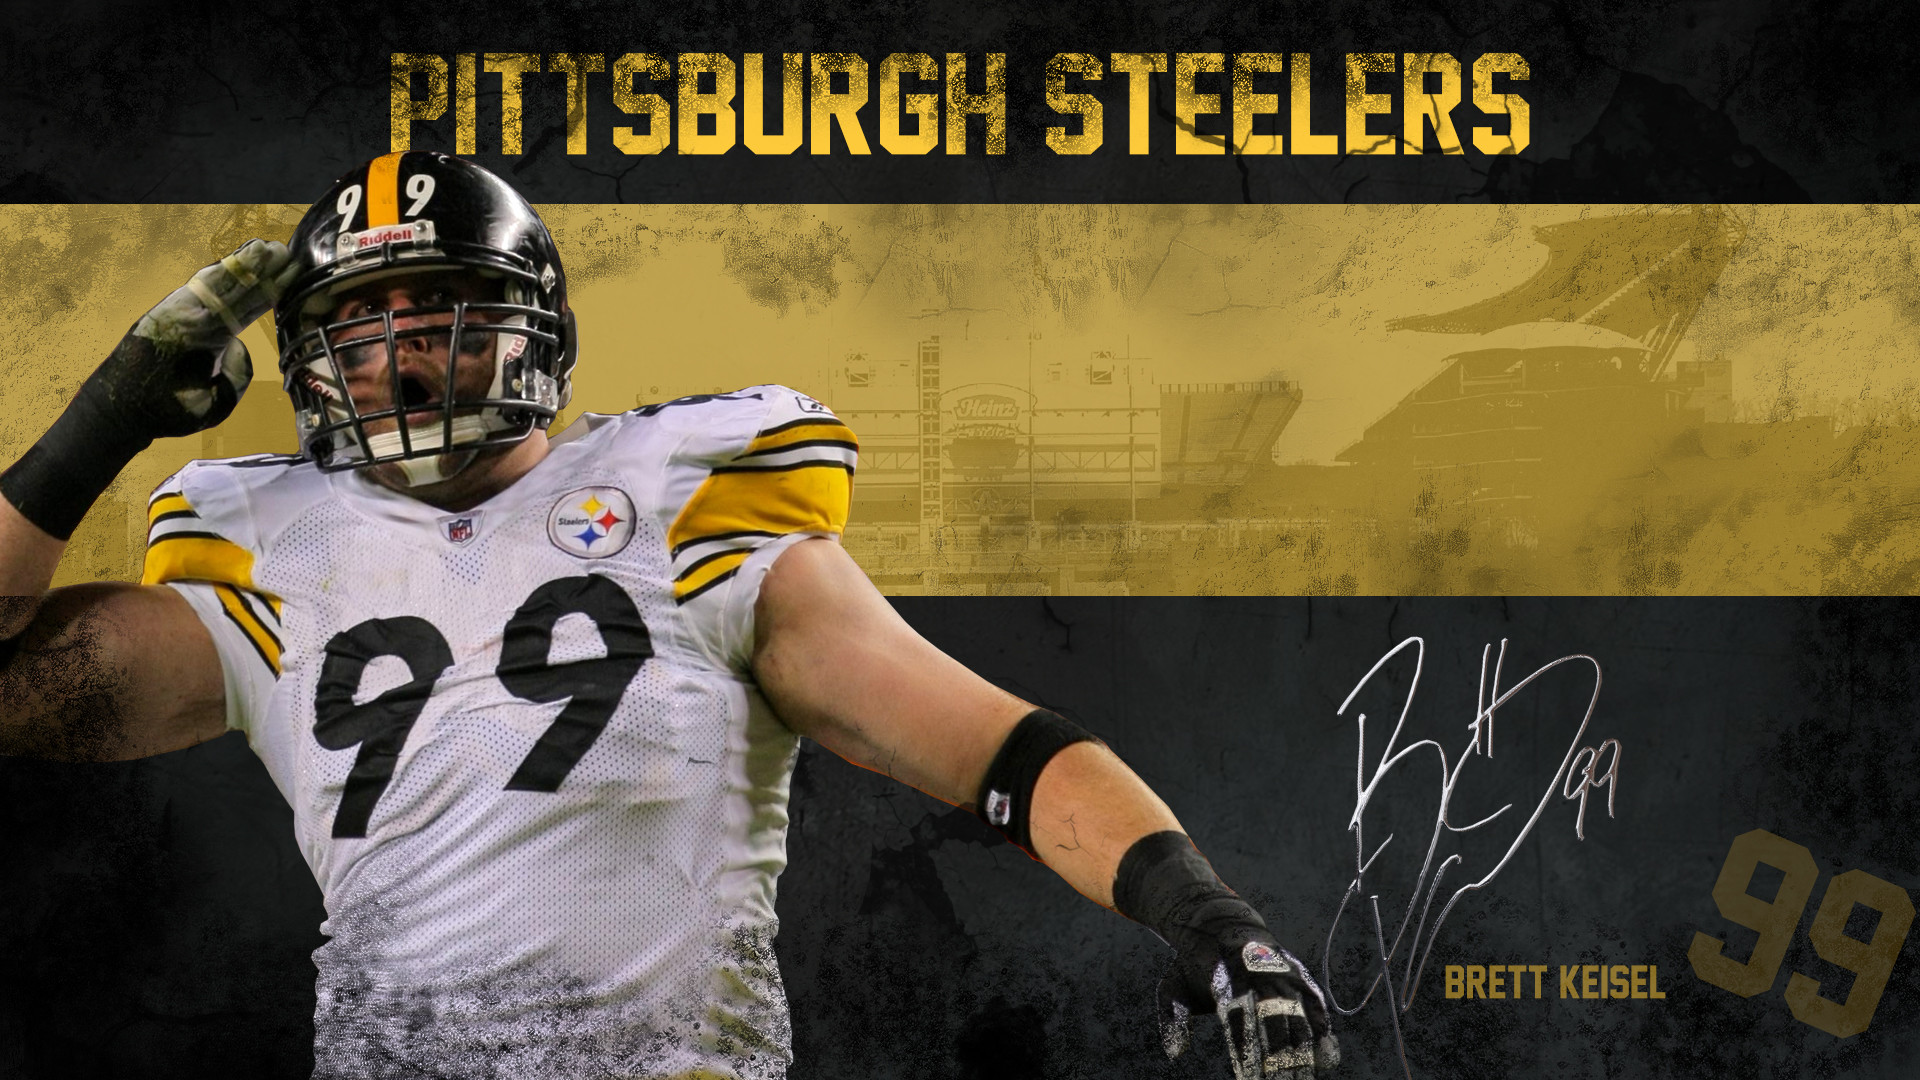 1920x1080 2017-03-12 - pittsburgh steelers wallpaper 1080p windows, #1879446 |  ololoshka | Pinterest | Pittsburgh steelers wallpaper and High resolution  wallpapers